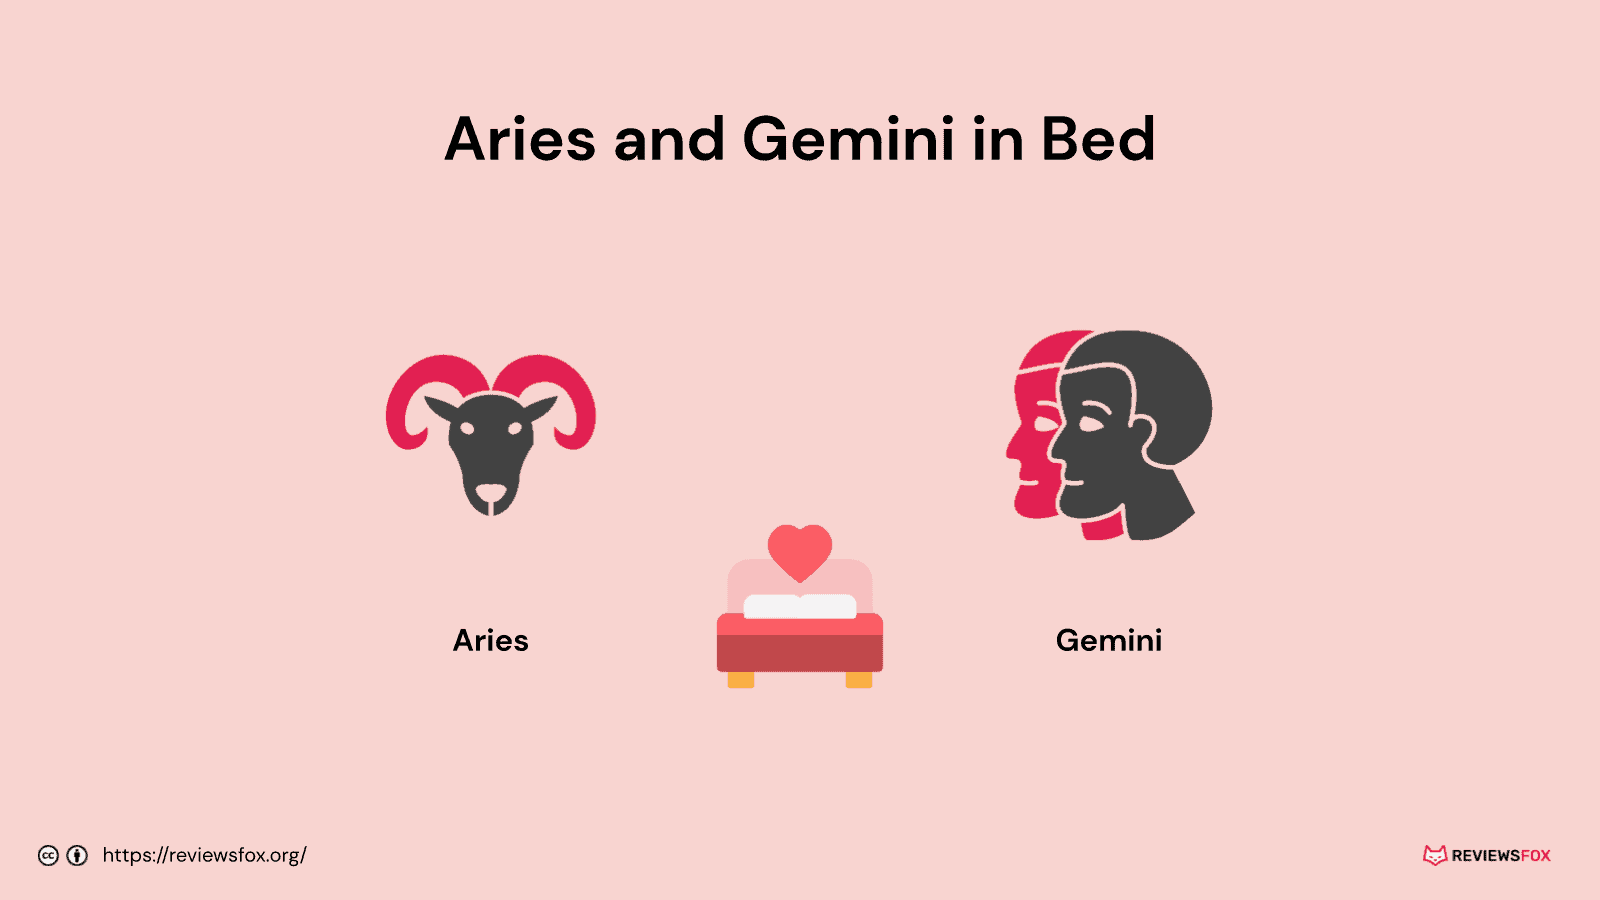 Aries and Gemini in bed